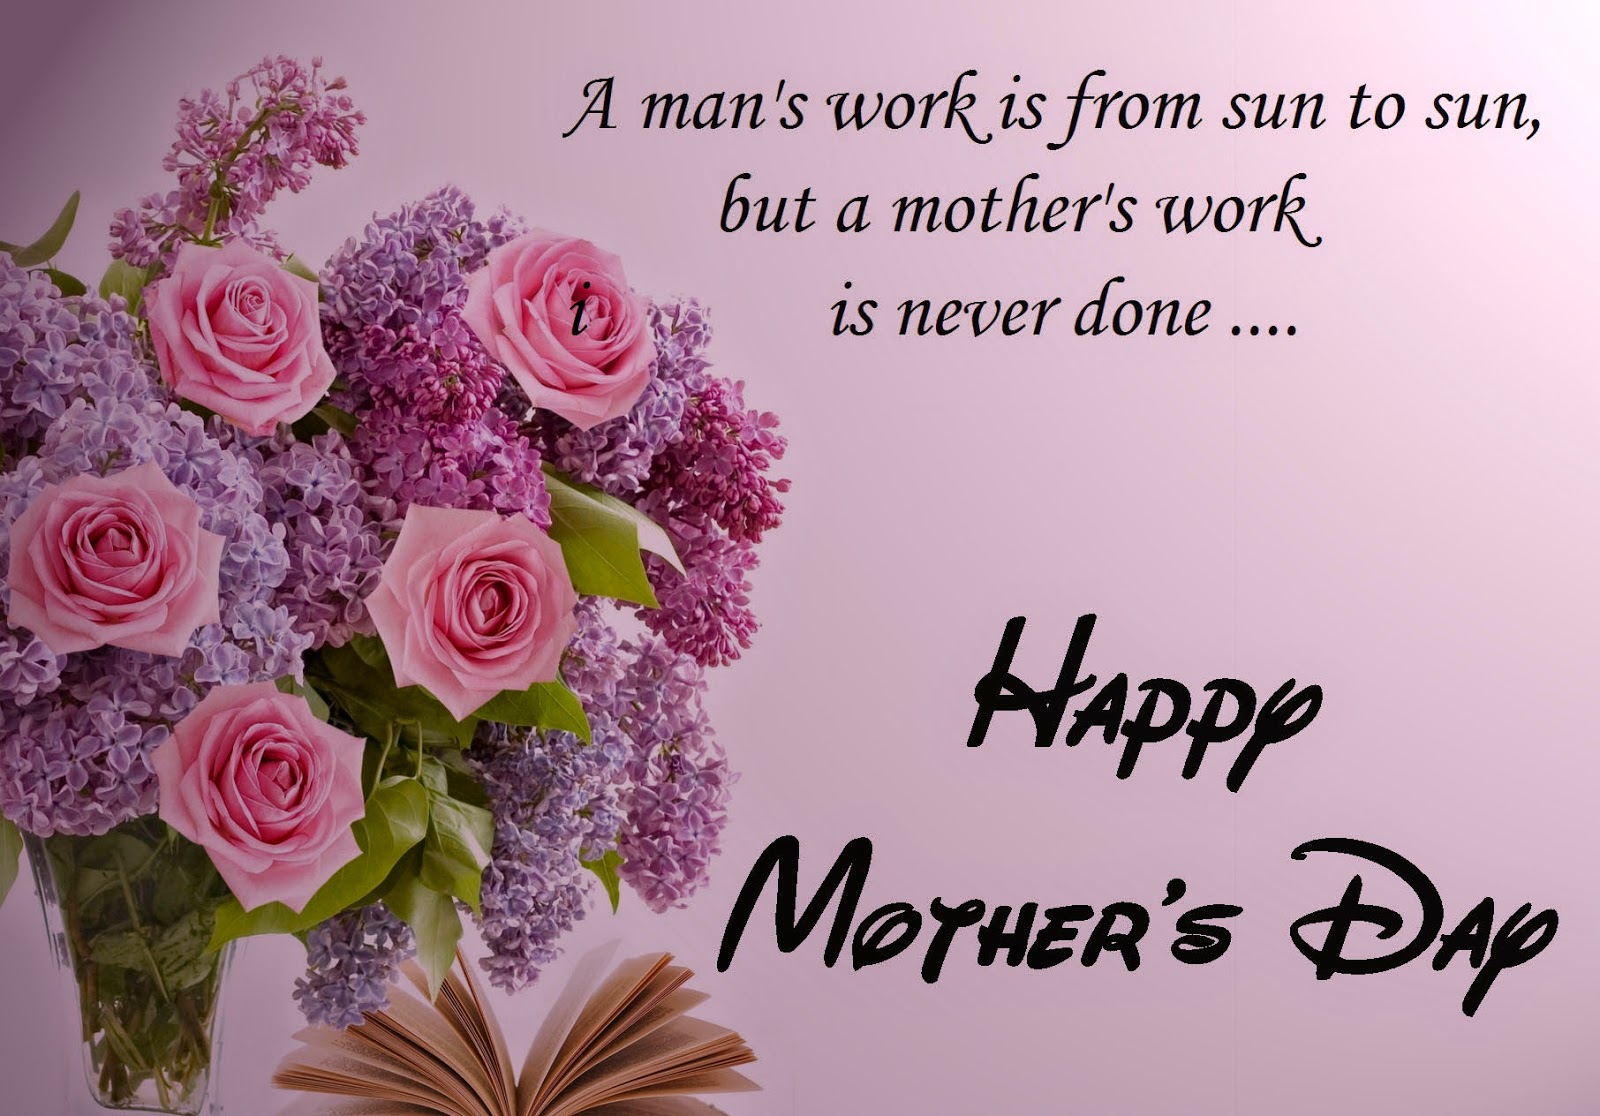 Mother's Day Message